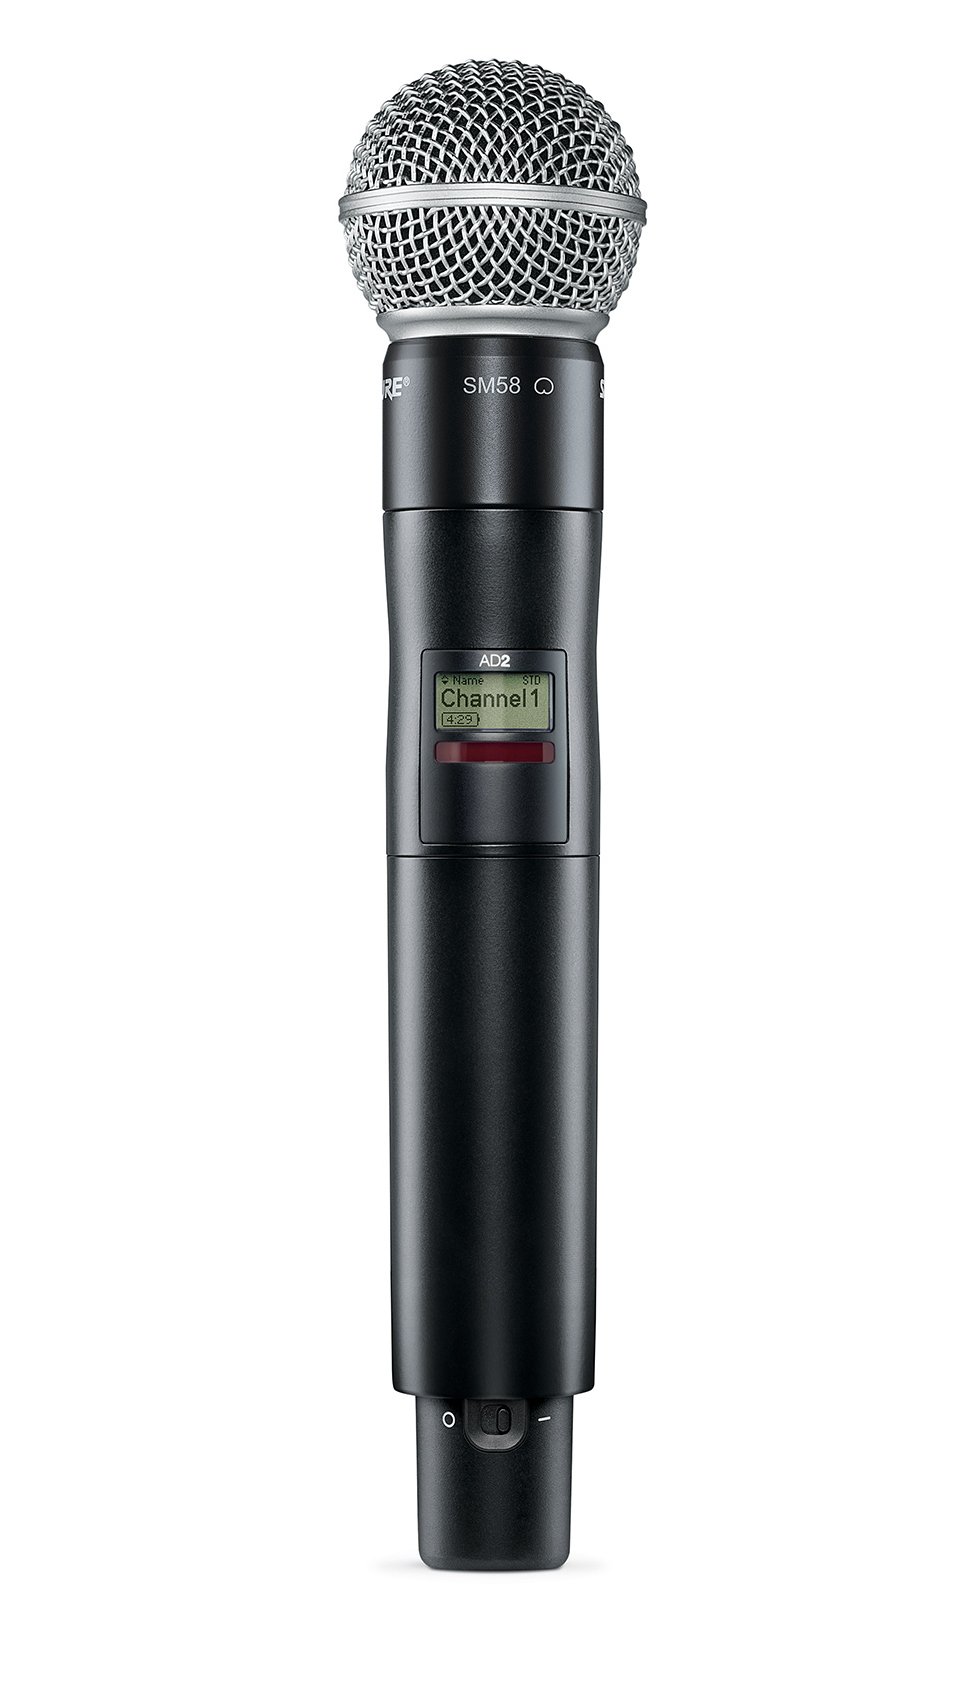 Photos - Microphone Shure AD2/SM58 Handheld  Transmitter with SM58 Capsule - G57 470 